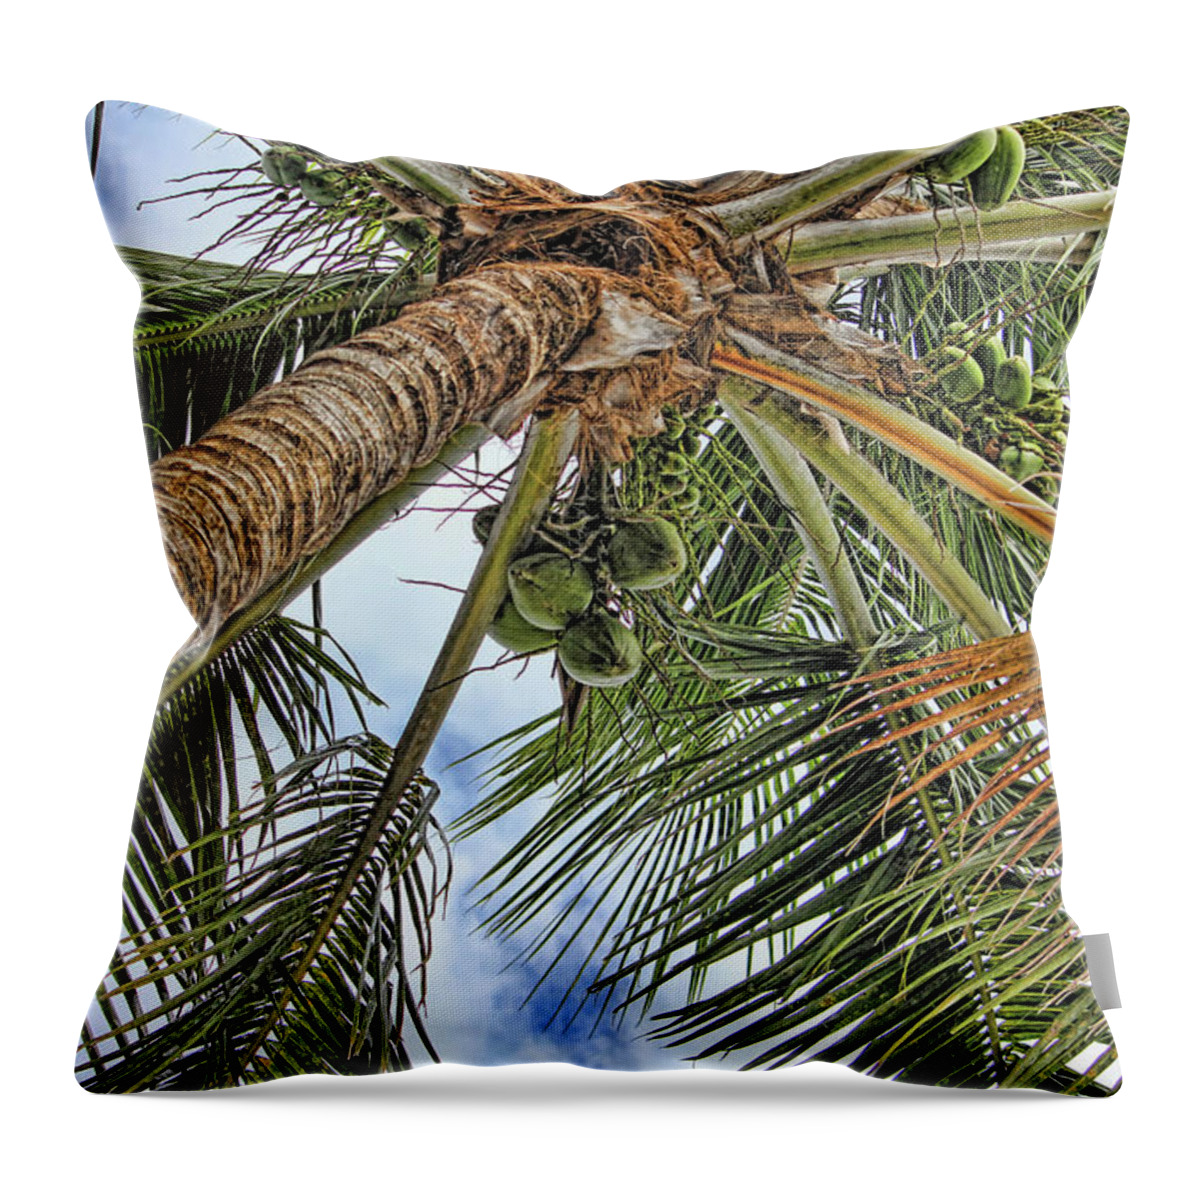 Coconut Palm Throw Pillow featuring the photograph Up A Tree by HH Photography of Florida